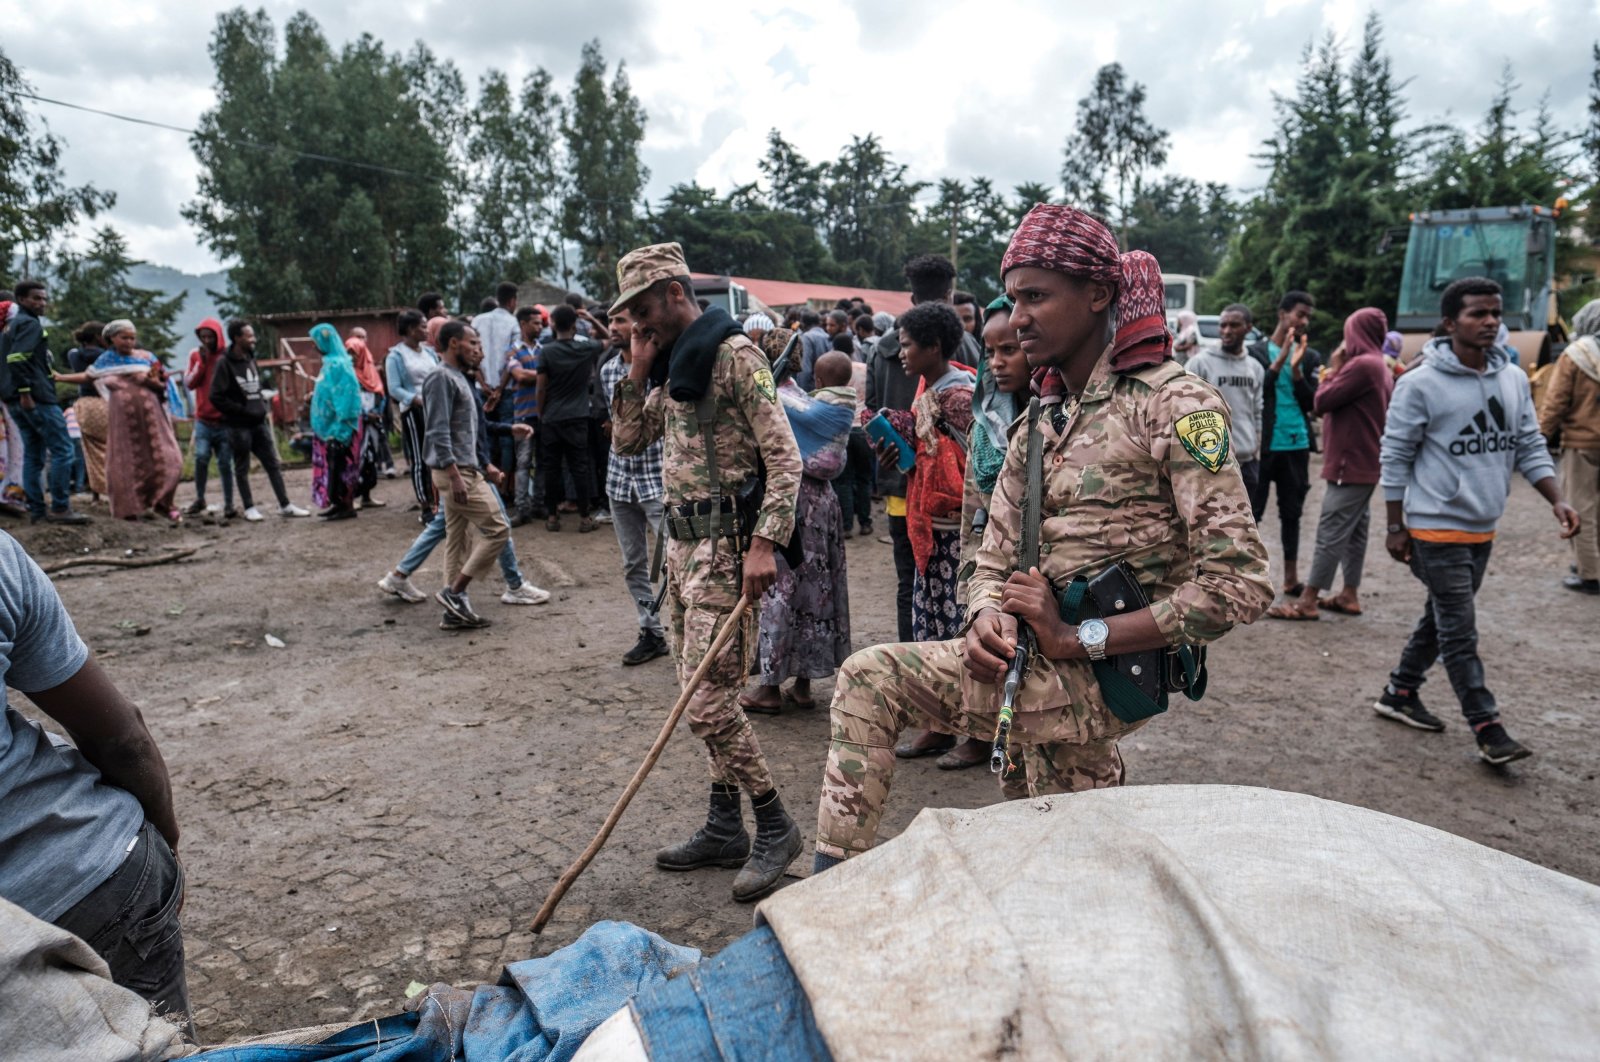 Armed men killed more than 150 in Ethiopia's attack: